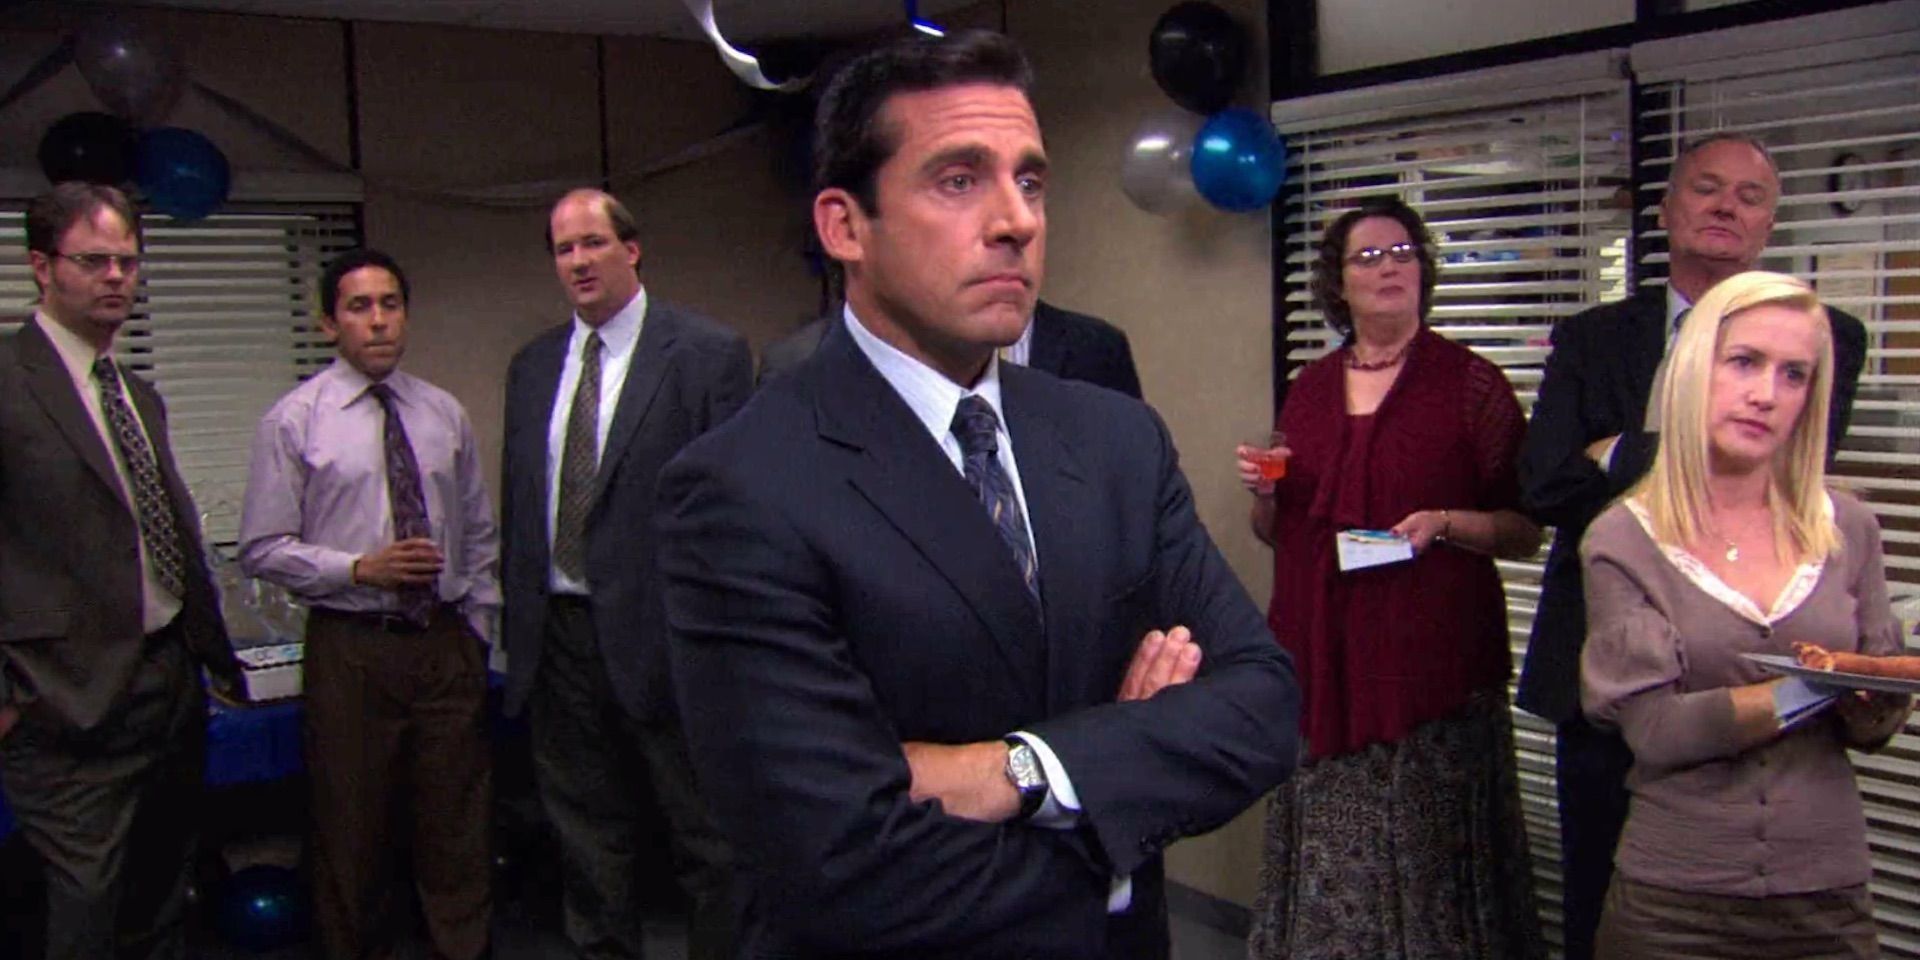 Michael at the Dunder Mifflin Infinity launch party in The Office